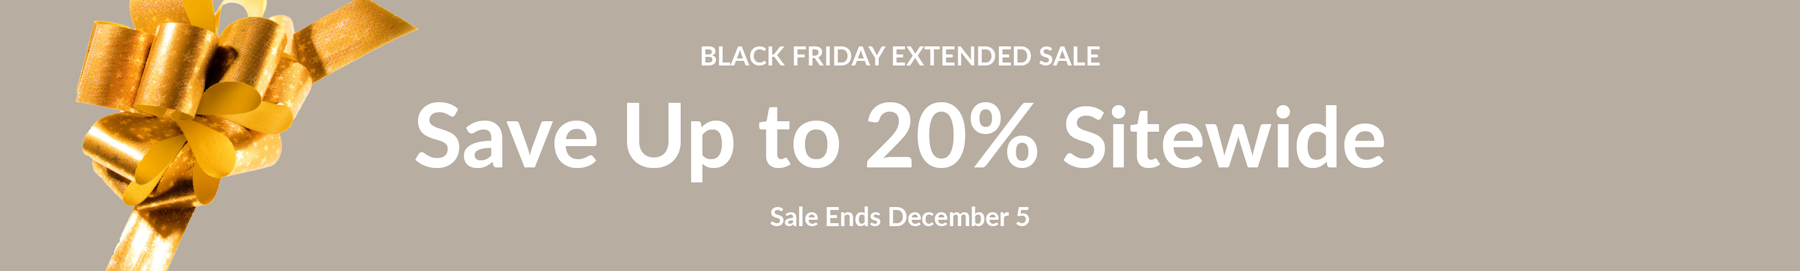 Black Friday Extended Sitewide Sale